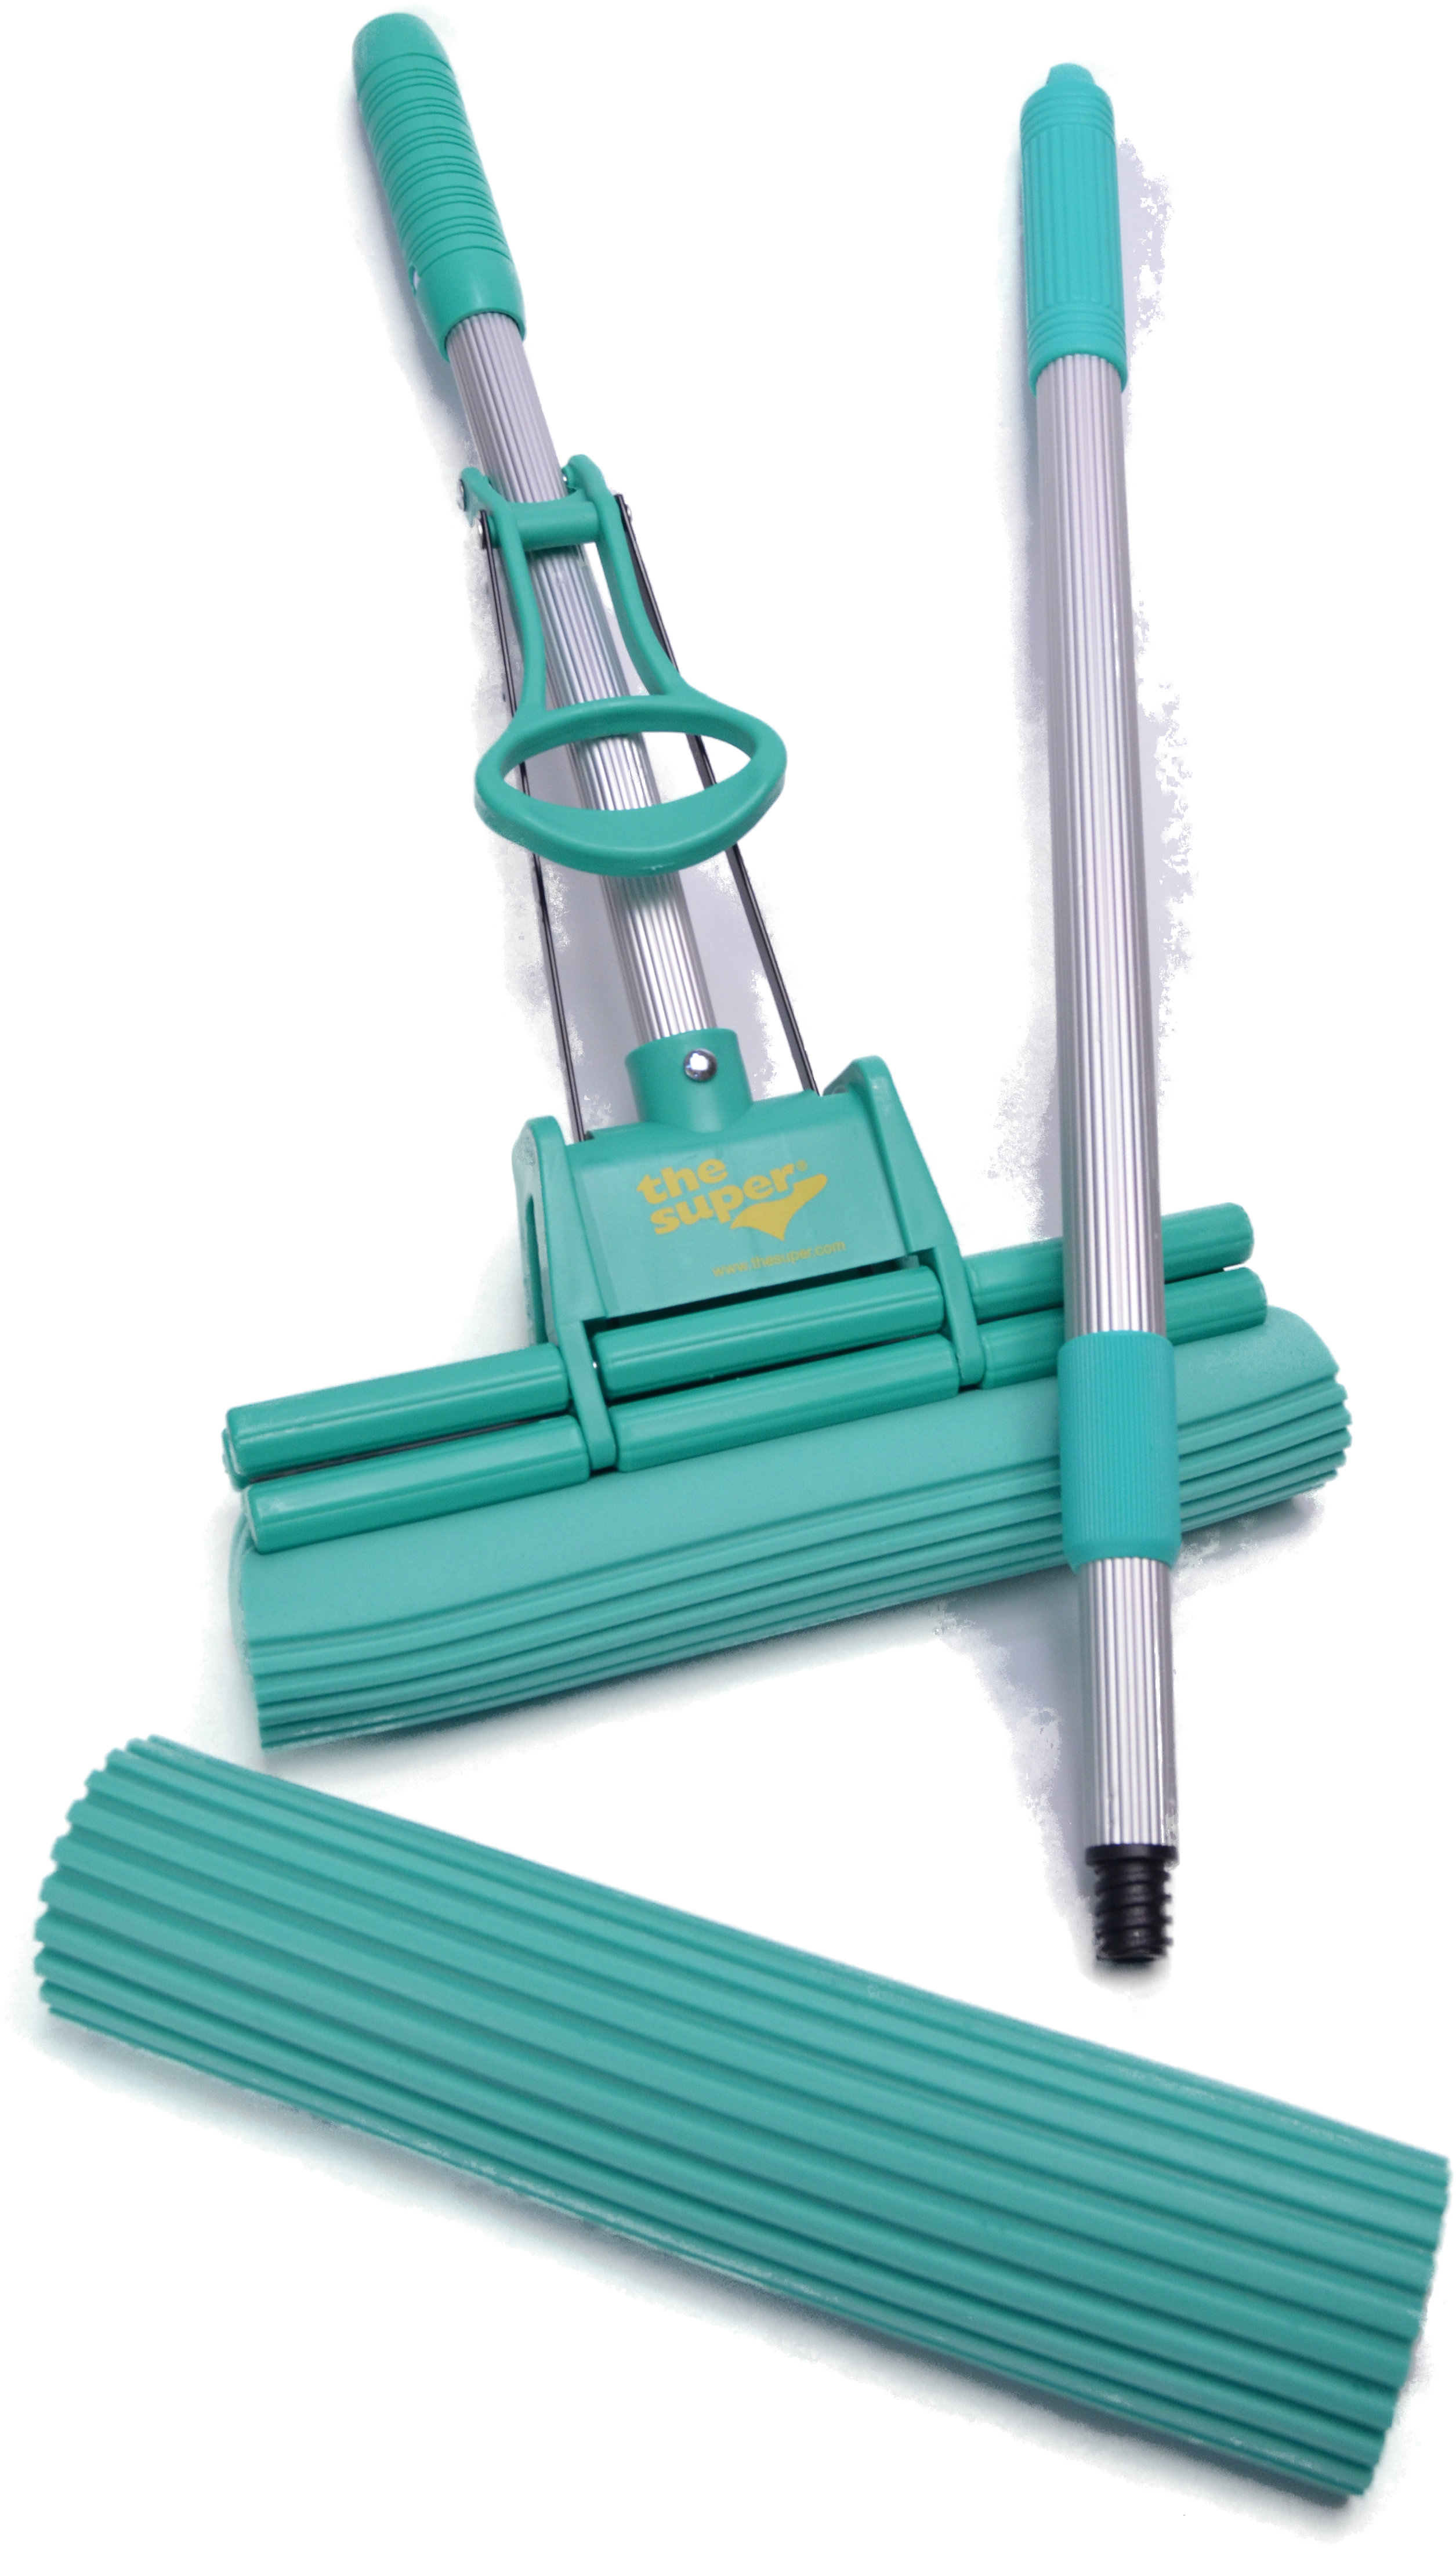 The Super Standard 11" Double Roller PVA Sponge Mop Set (Mop and 1 Extra Refill) - image 2 of 5